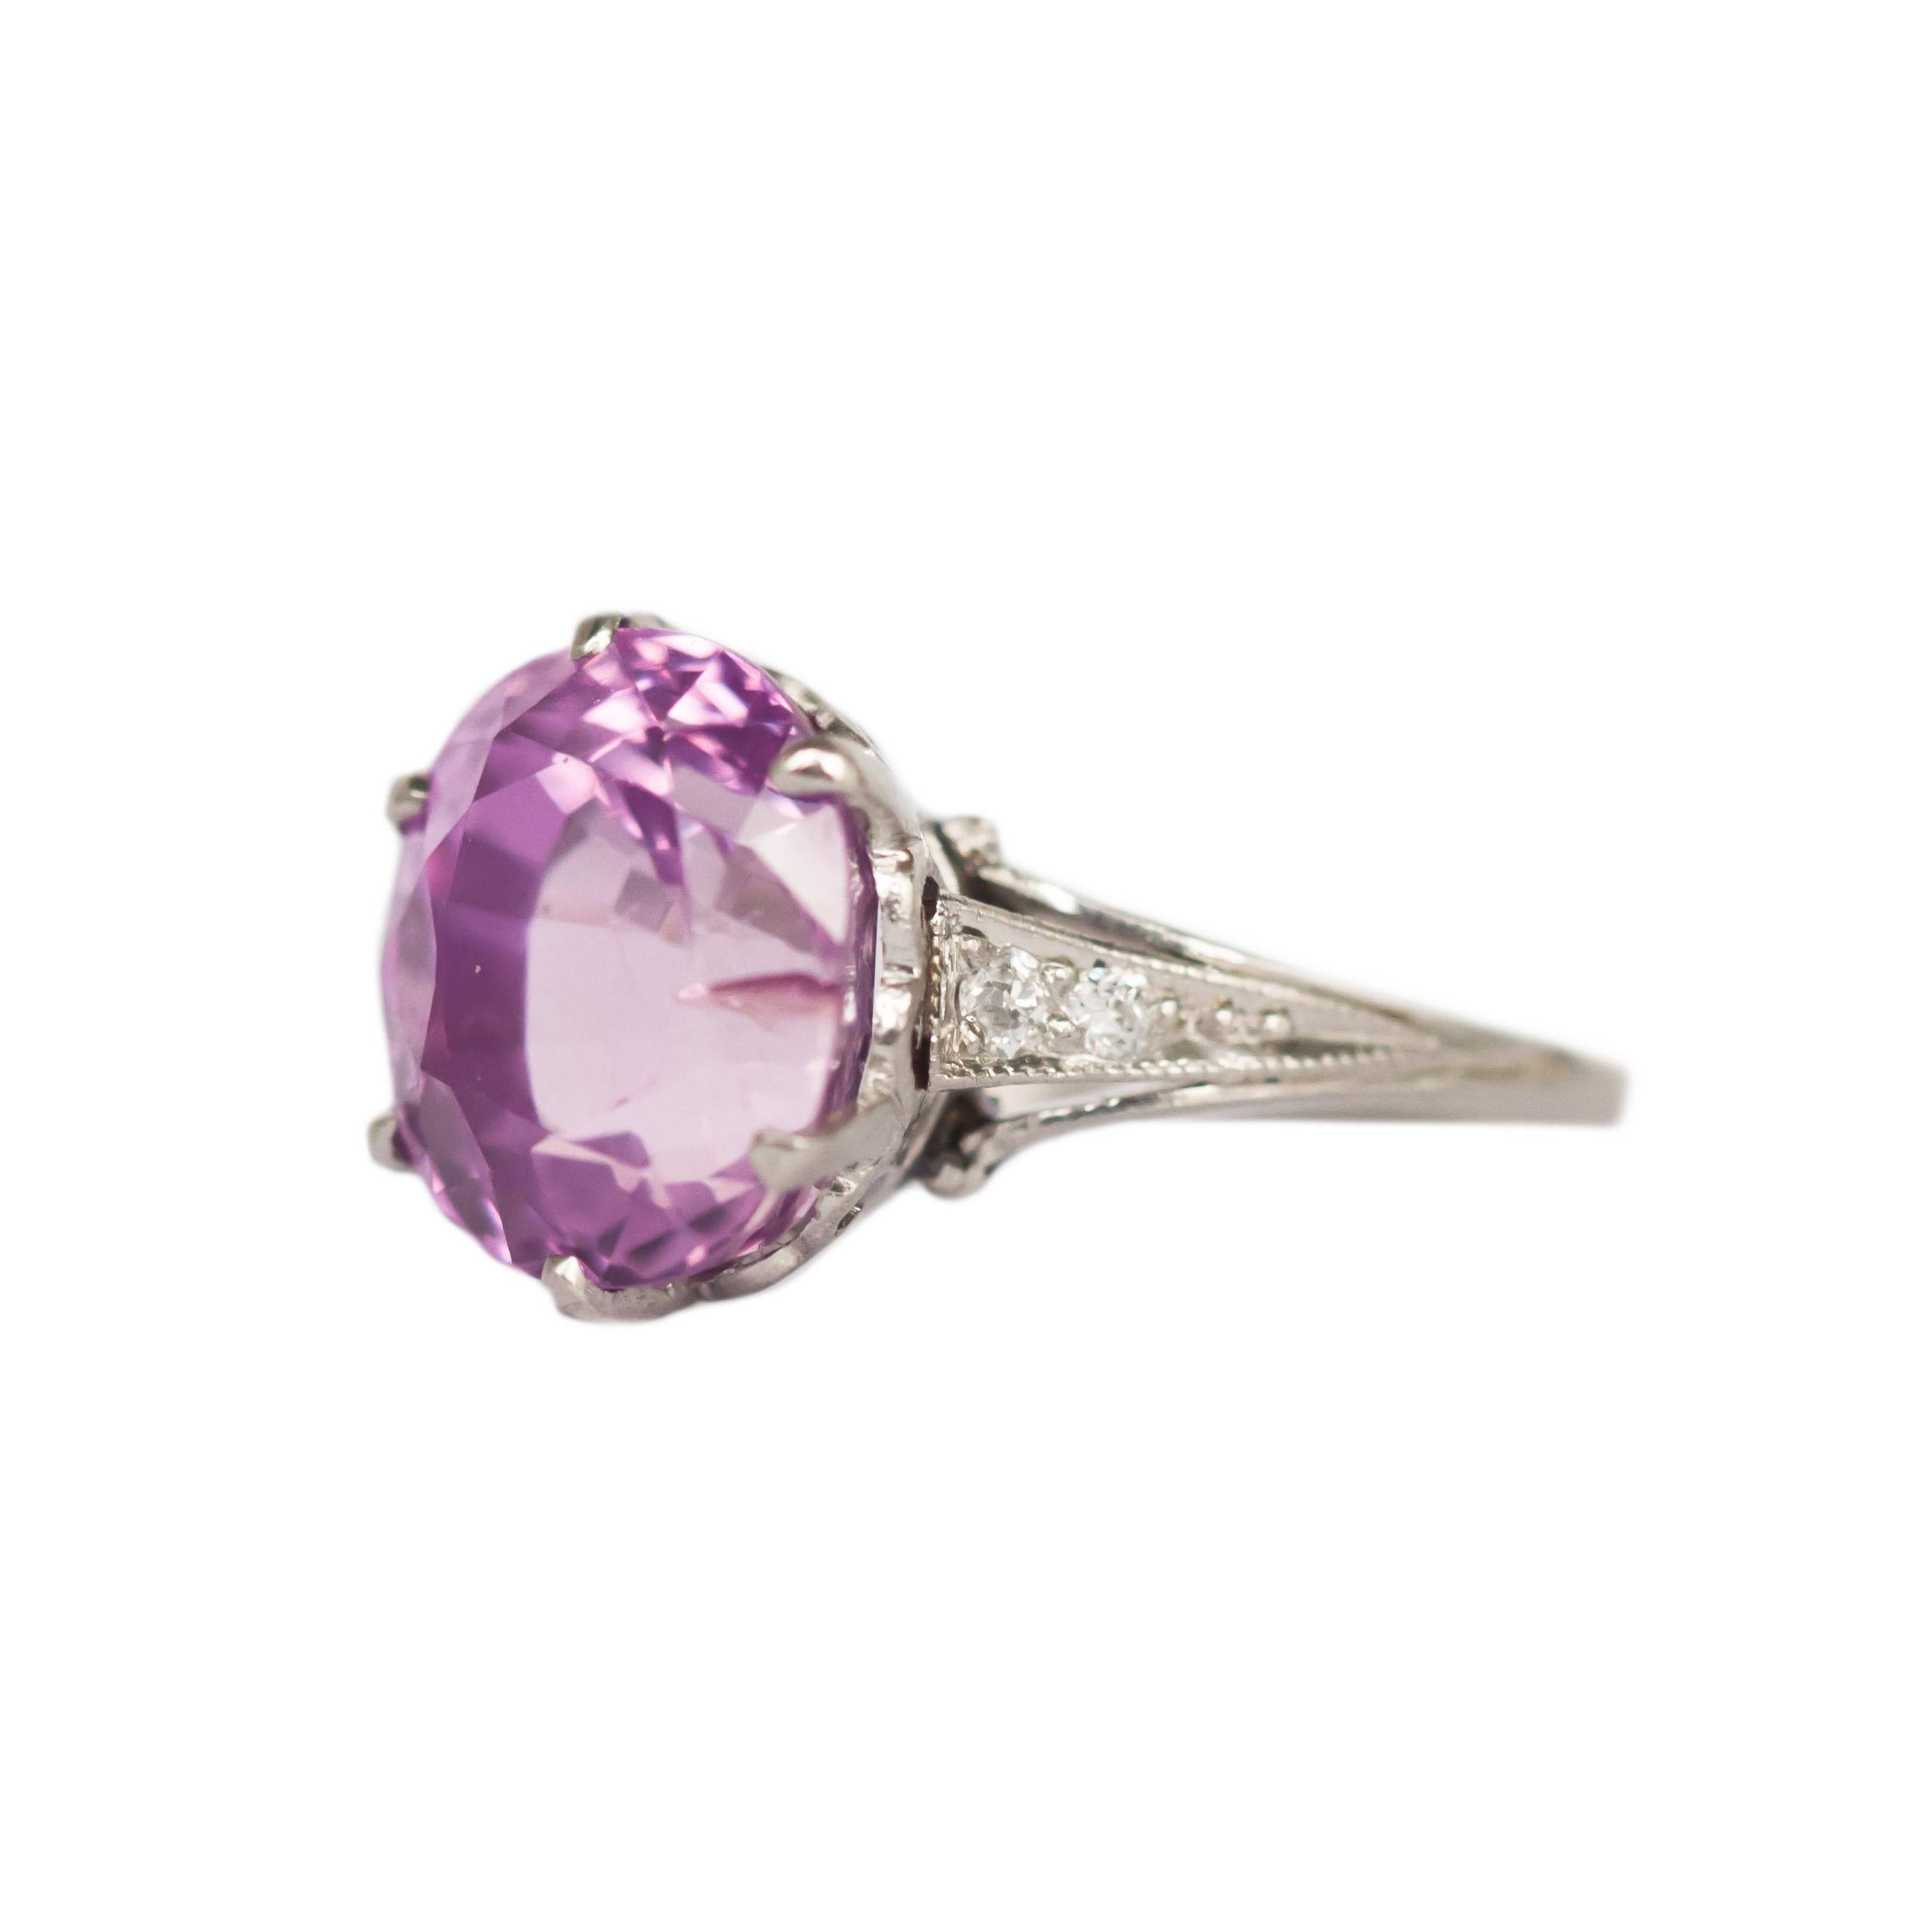 Ring Size: 4.90
Metal Type: Platinum
Weight: 4.1 grams

Color Stone Details: 
Type: Natural Unheated Sapphire 
Shape: Antique Oval
Carat: 5.38 carat
Color: Pink


Side Stone Details: 
Shape: Old European Brilliant 
Total Carat Weight: .08 carat,